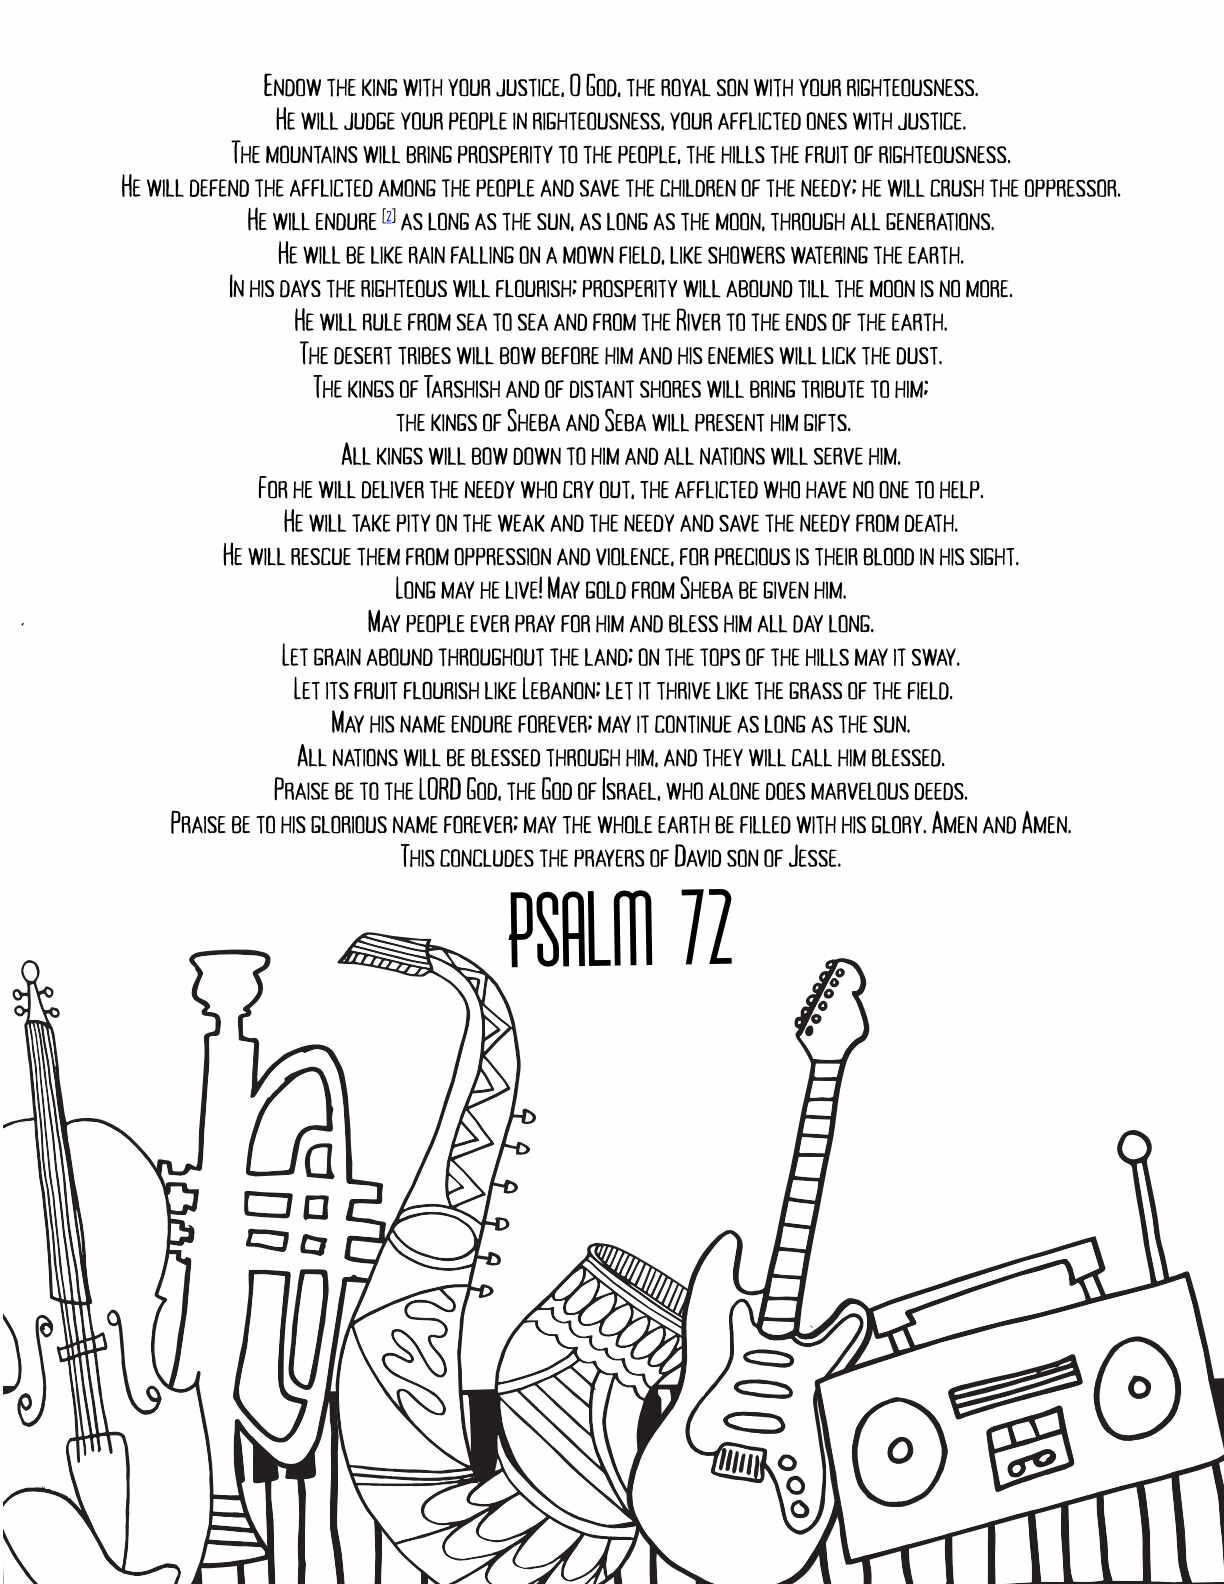 10 Free Printable Psalm Coloring Pages - Download and Color Adult Scripture - Psalm 72CLICK HERE TO DOWNLOAD THIS PAGE FREE